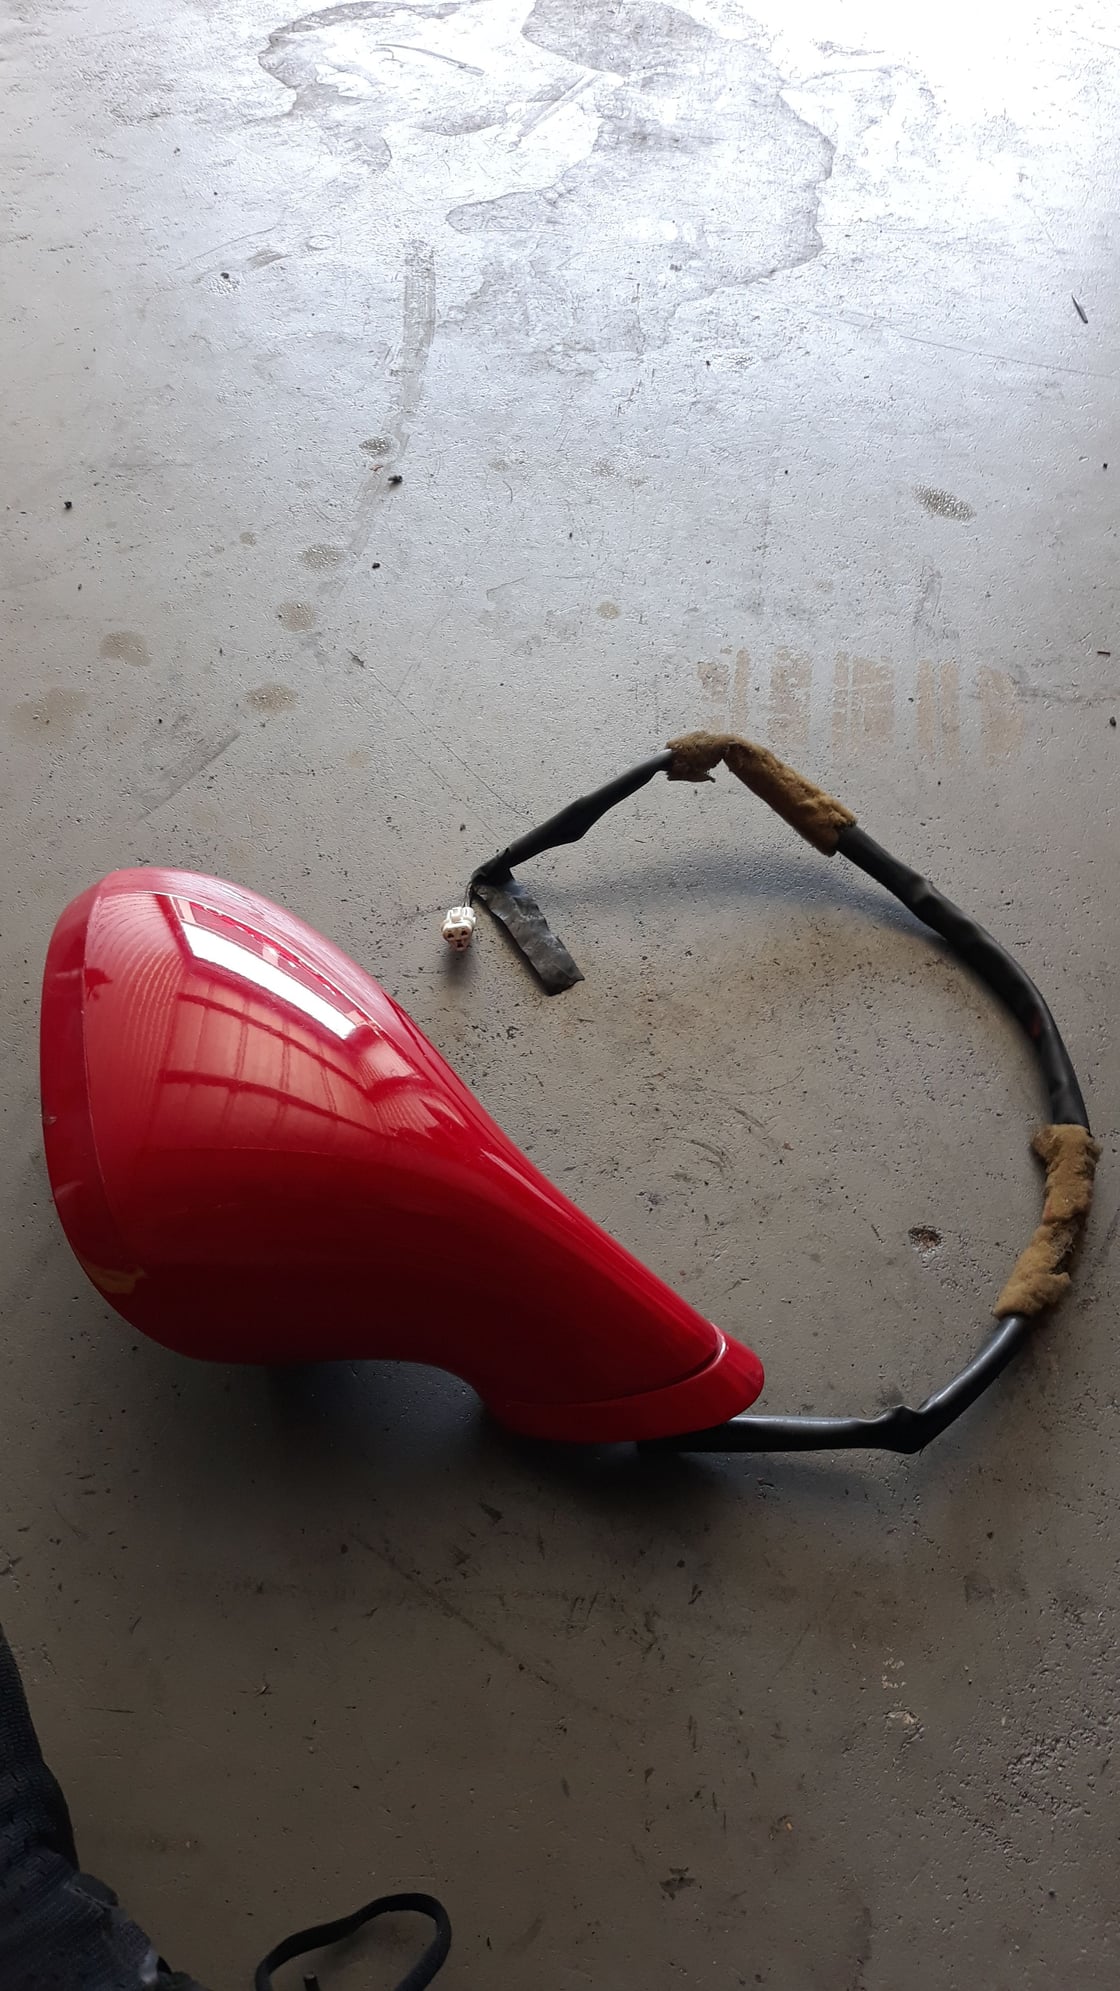 Exterior Body Parts - OEM side mirrors - Used - 1992 to 2002 Mazda RX-7 - Orlando, FL 32824, United States